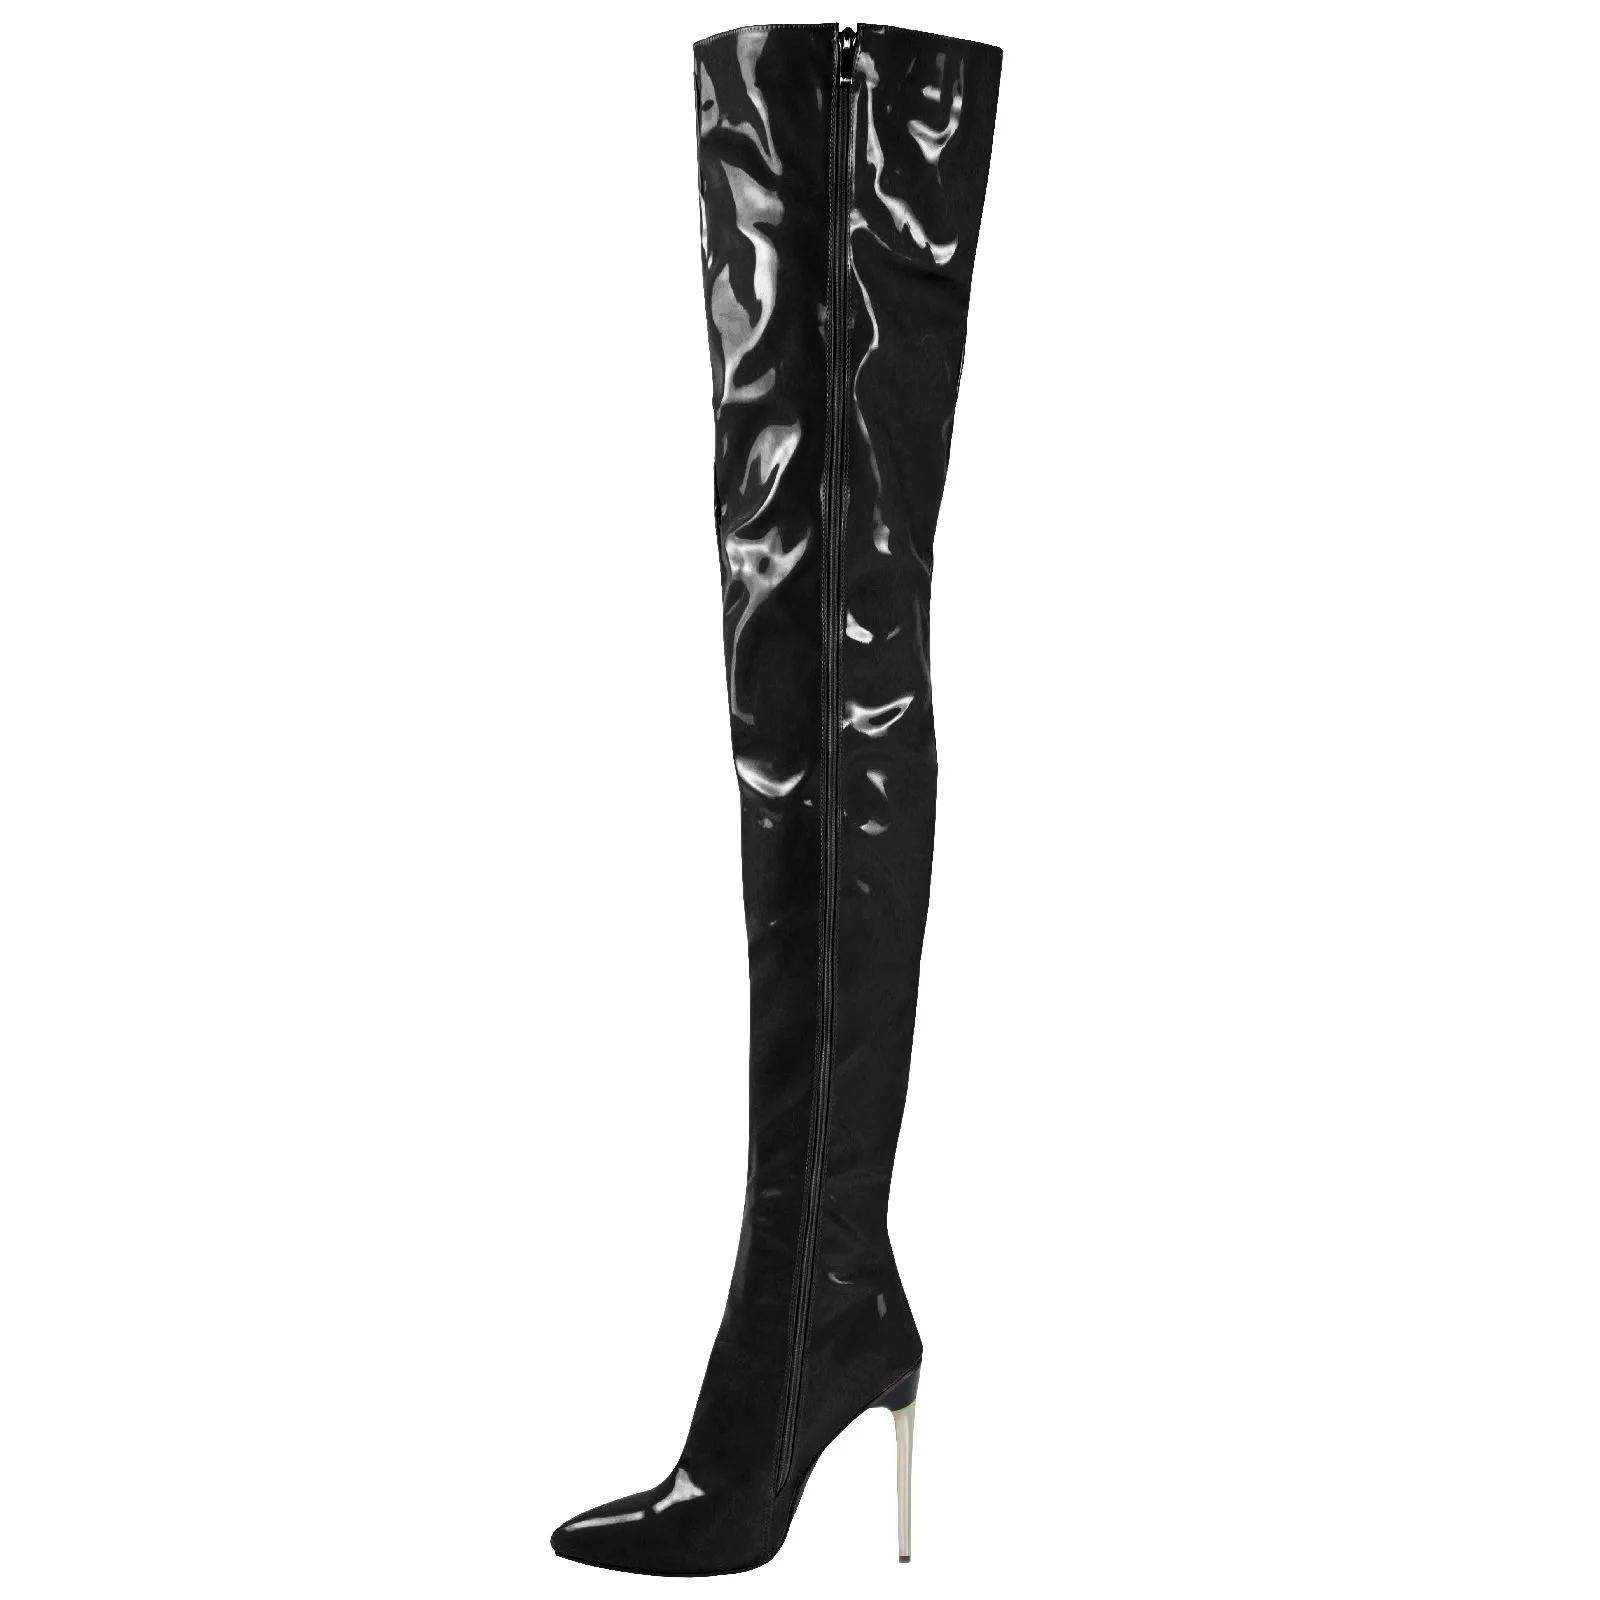 

Botas Overknee Long Stiletto Leather Women Thigh High Crotch Boots Pointed Toe Sexy Ladies High Heel Runway Trendy Shoe Woman